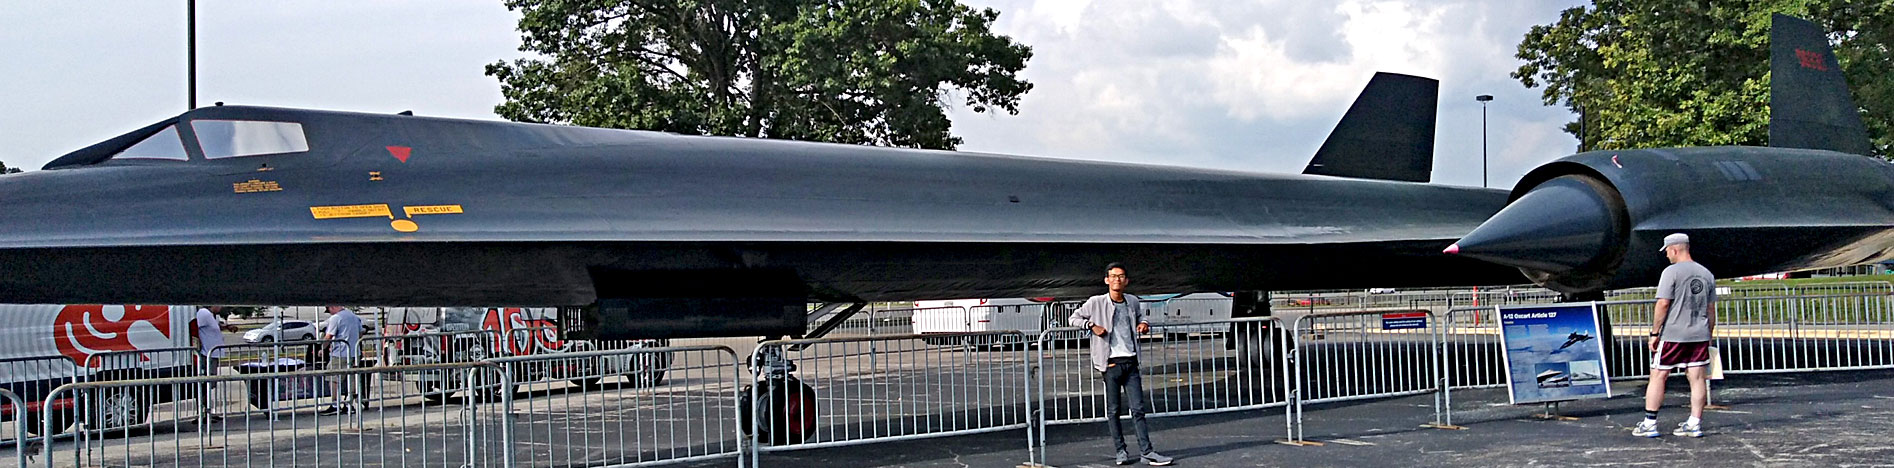 JPA student Savong ’18 with a US Air Force Lockheed SR-71 Blackbird at the US Space and Rocket Center at Huntsville, Alabama. Jay Pritzker Academy, Siem Reap, Cambodia. Jay-Pritzker-Academy-Siem-Reap-Cambodia